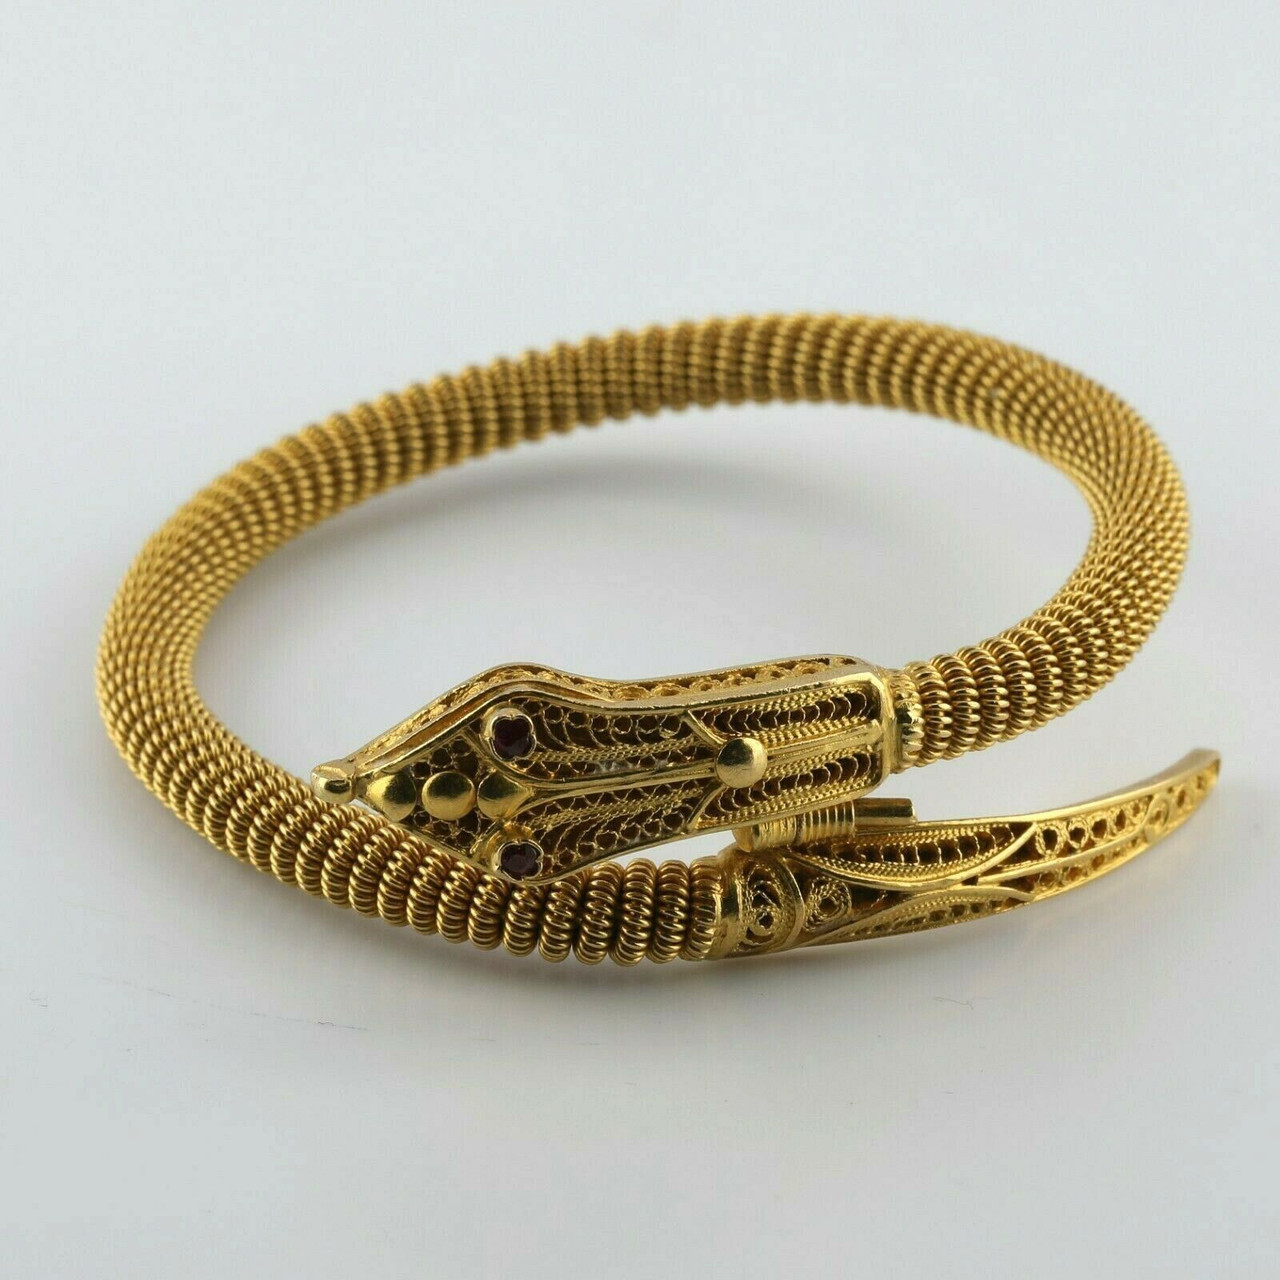 Snake Bracelet Super Hand Made 21K Yellow Gold Head and Ruby Eyes - Company